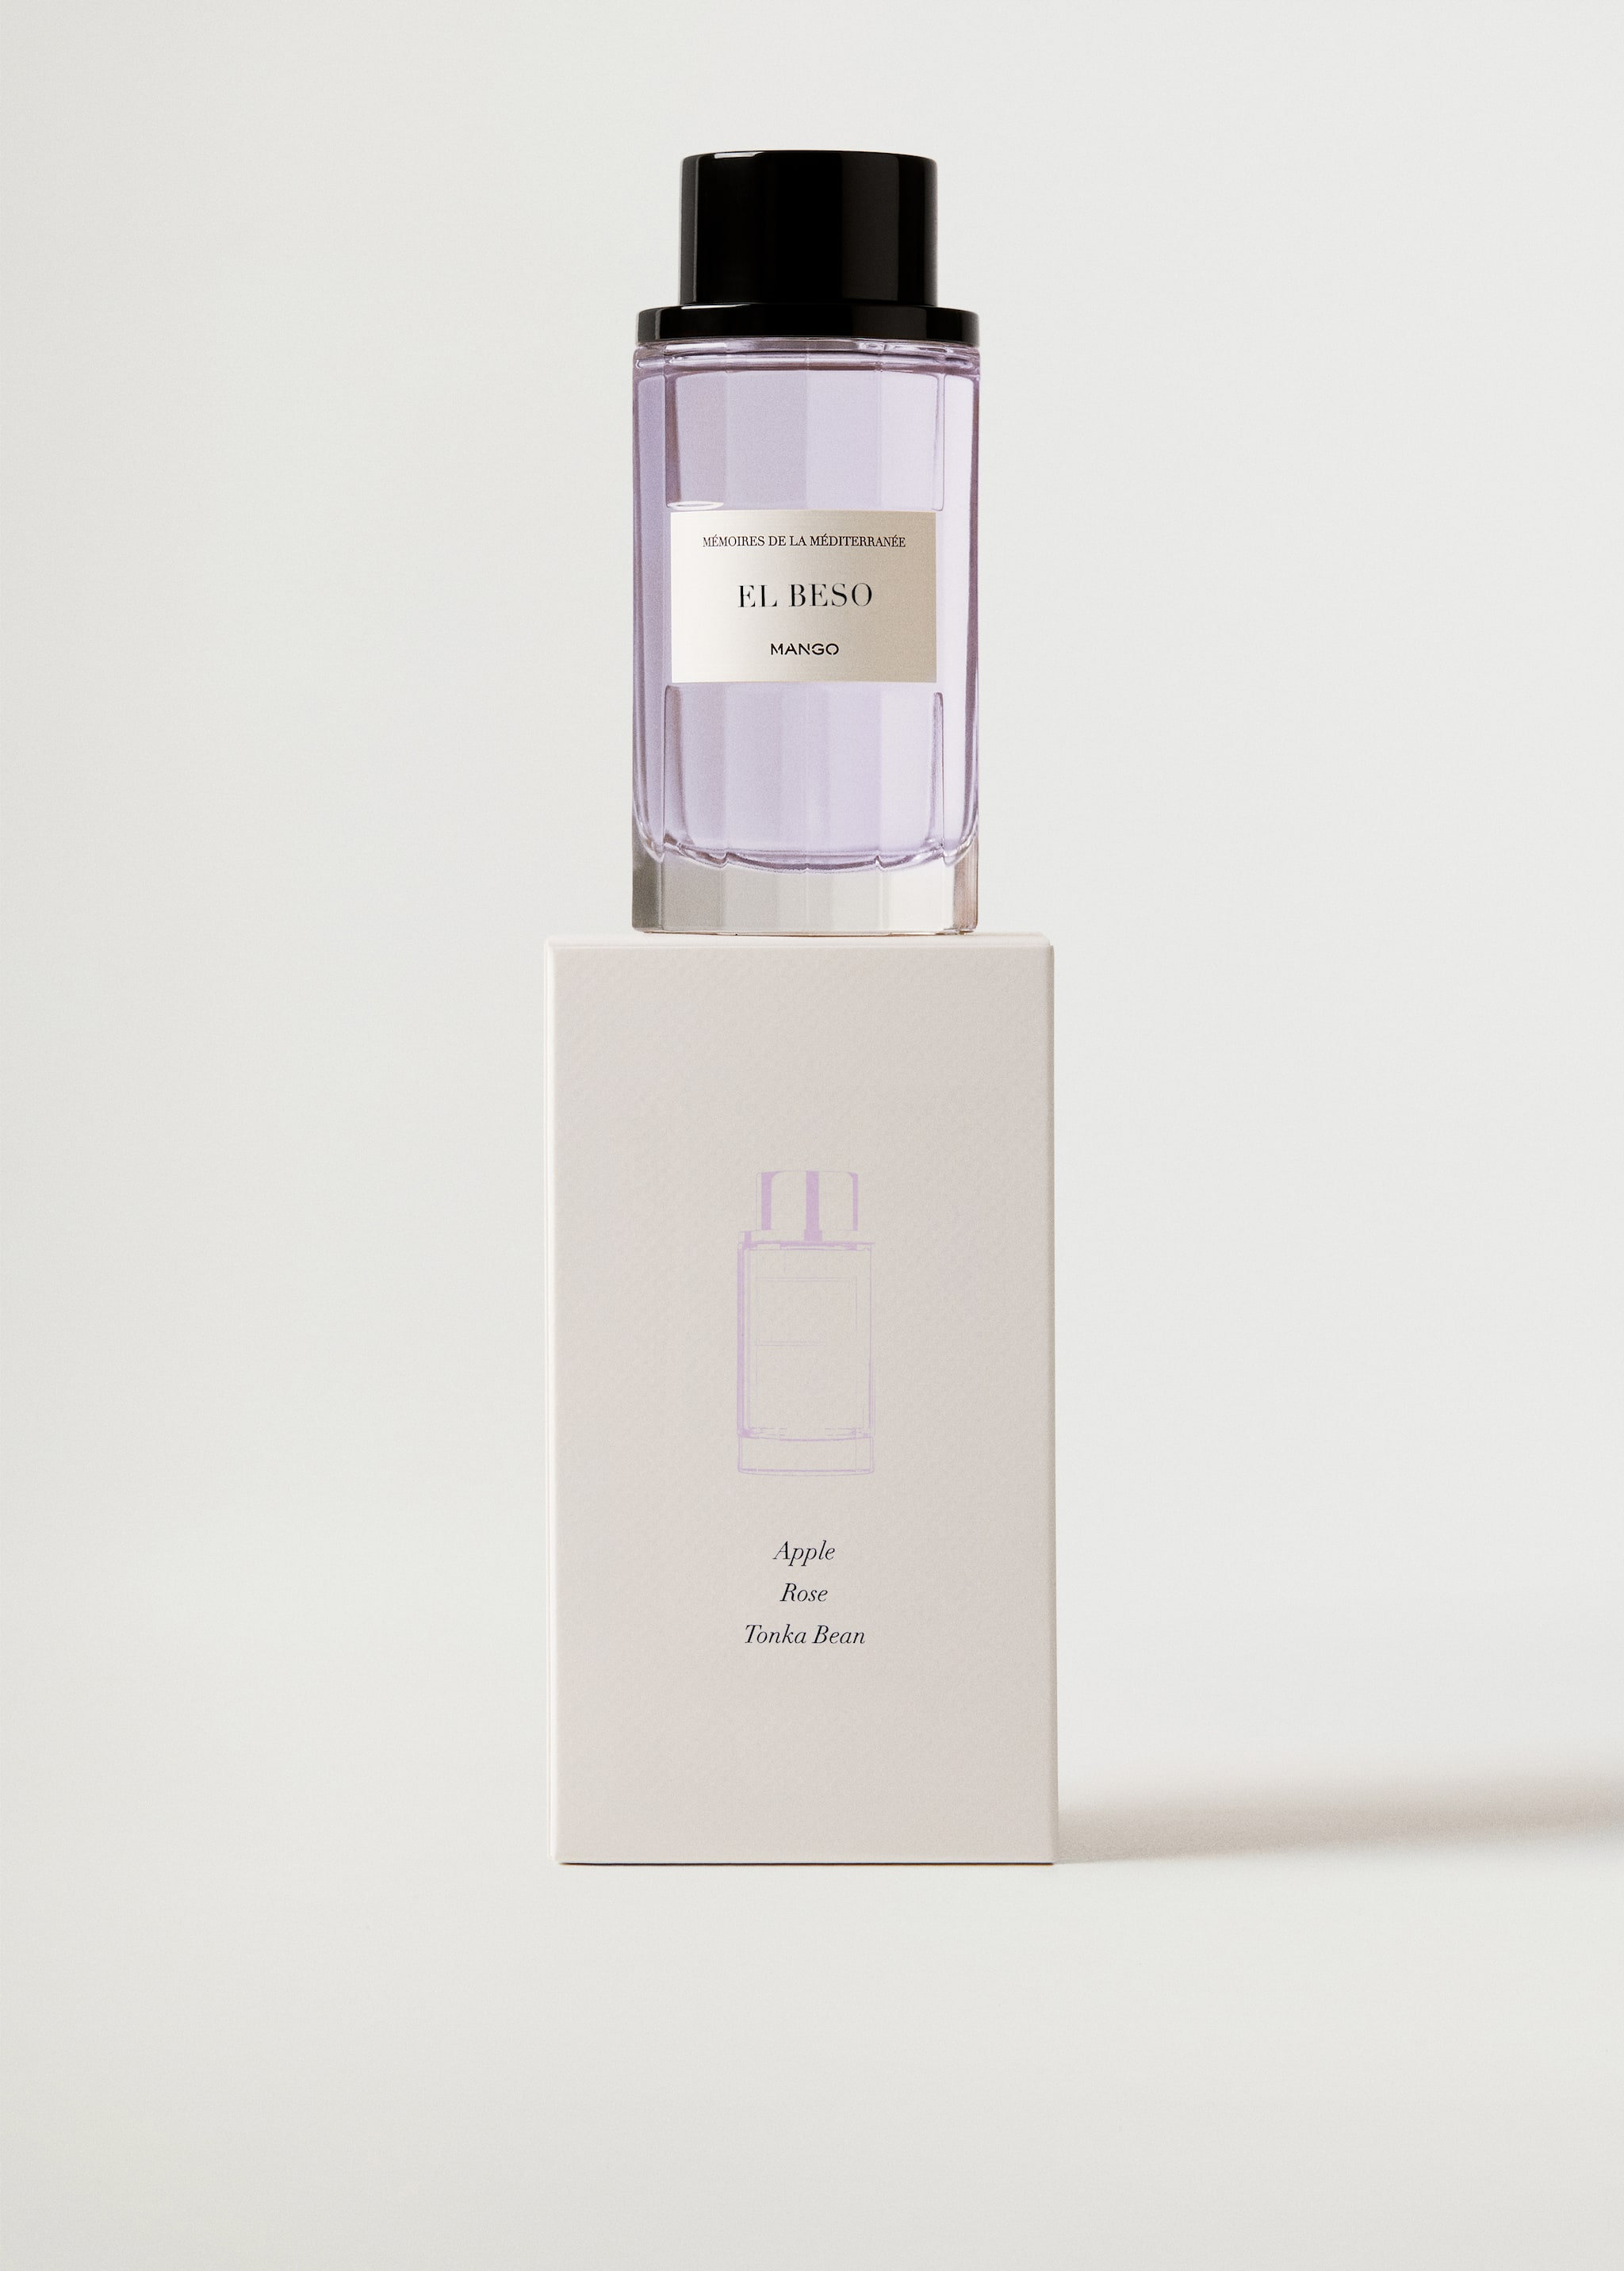 El Beso fragrance 100 ml - Details of the article 3